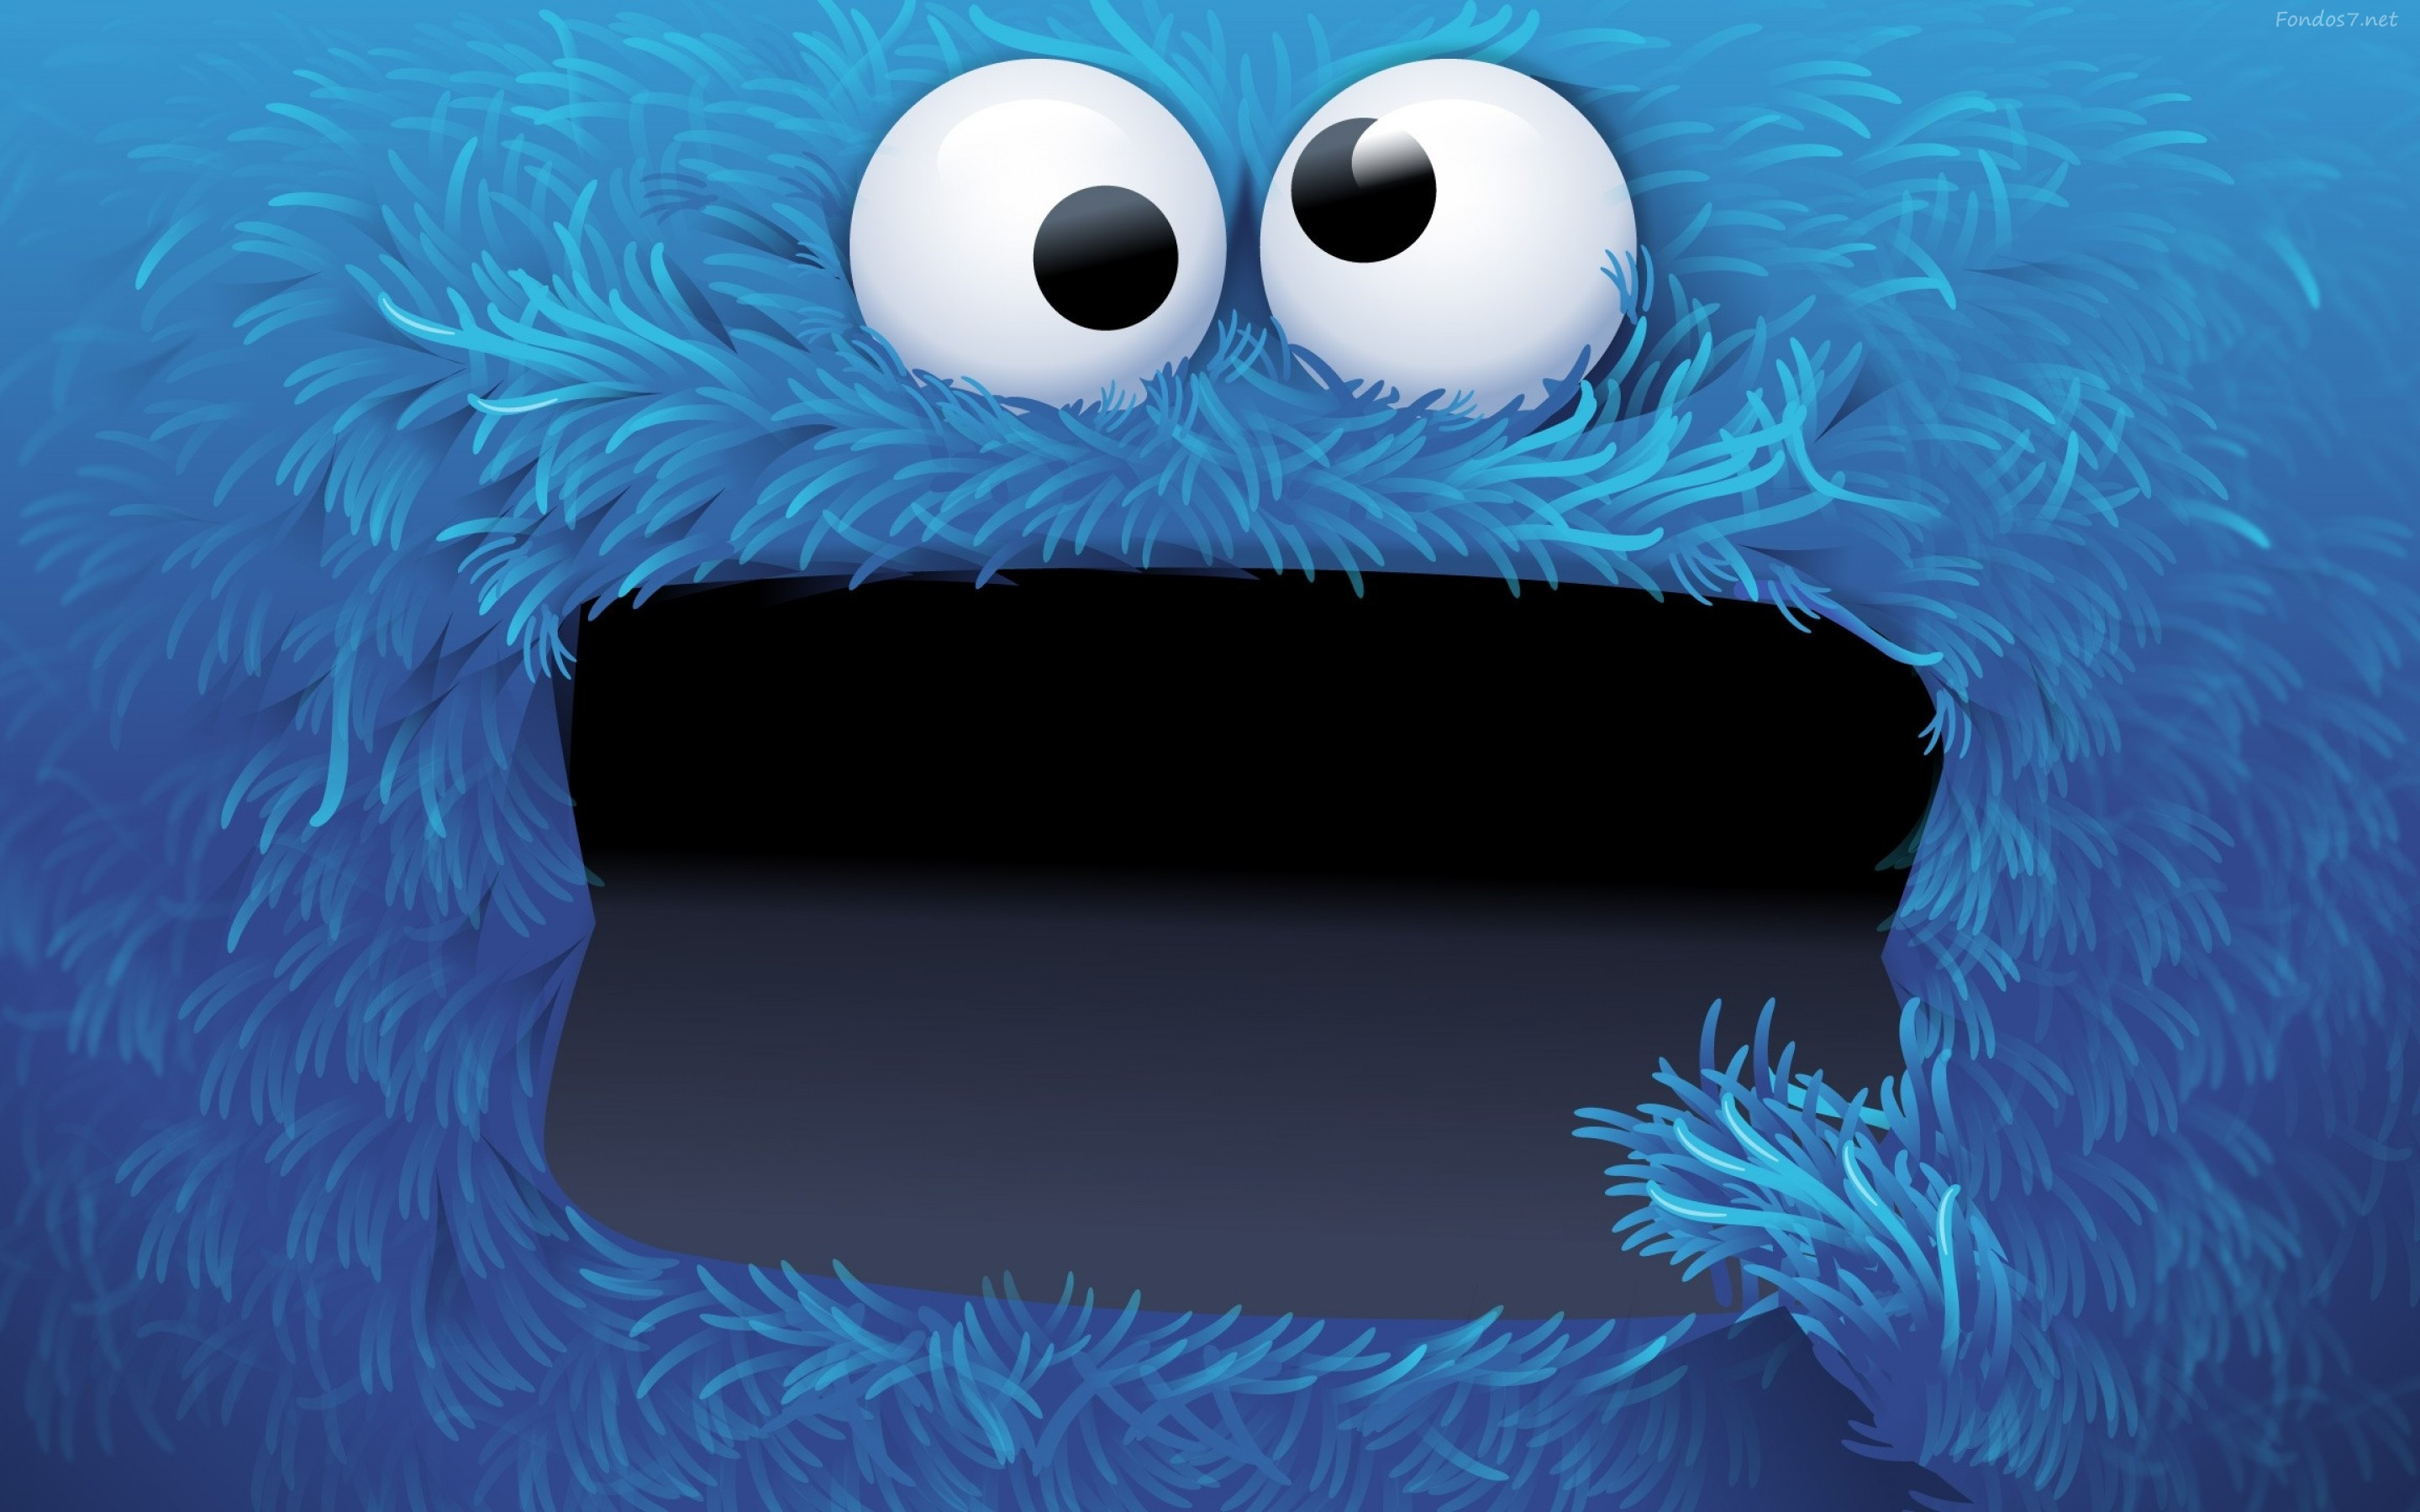 Cookie Monster Wallpaper Full HD Search